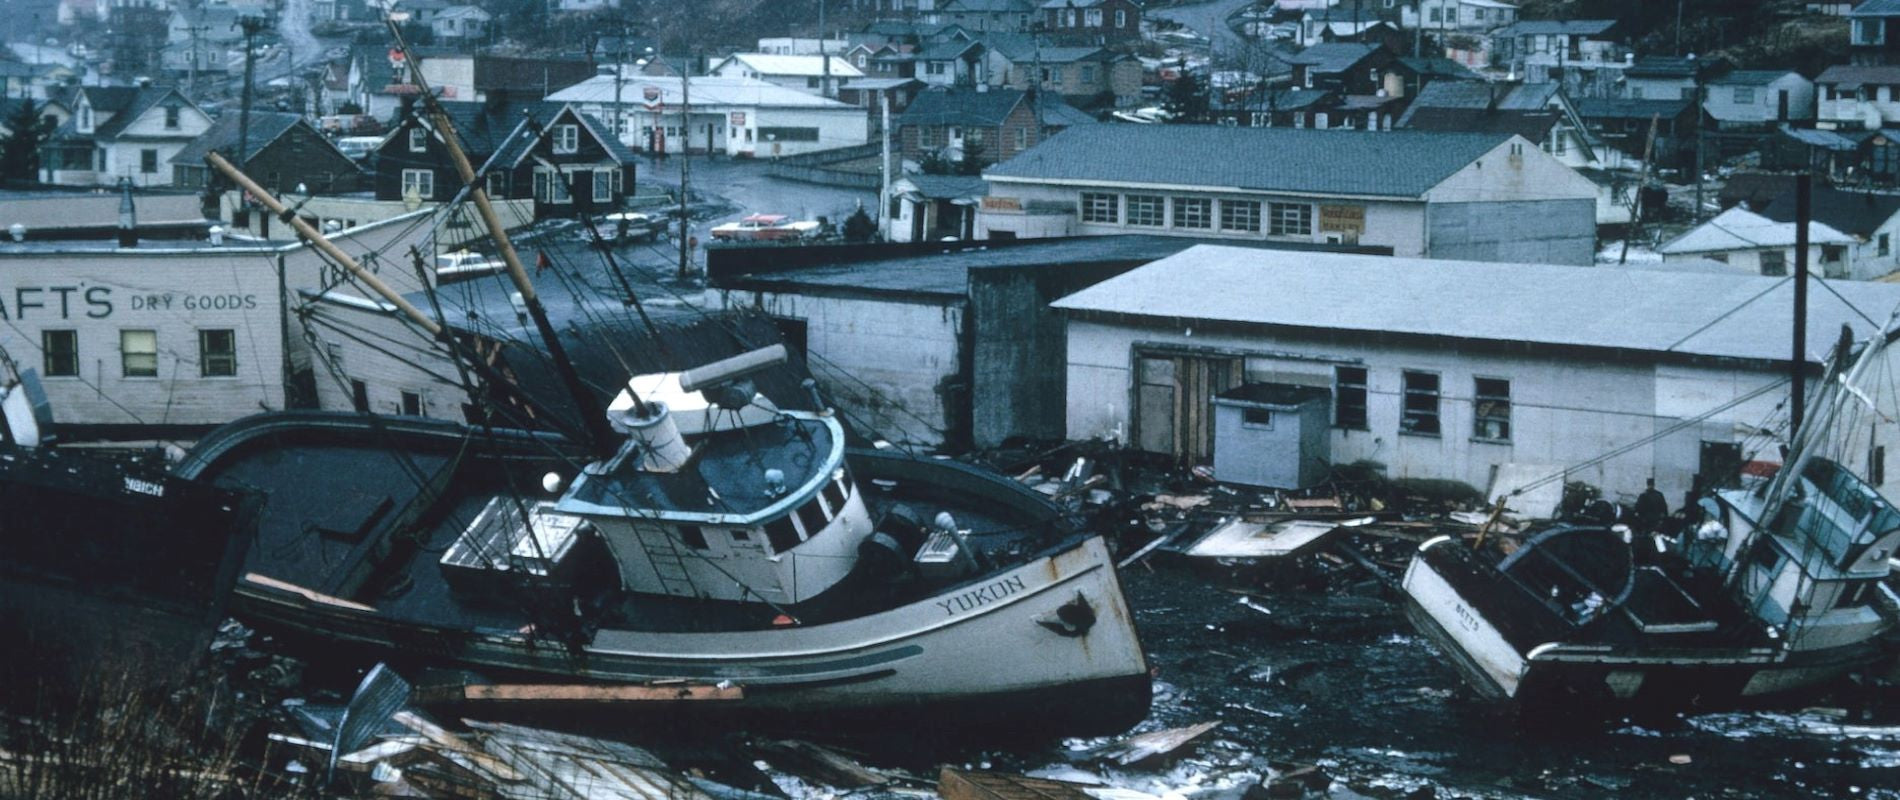 Hurricane Storm Serge in town with fishing boats, logs and other debris blocking streets.